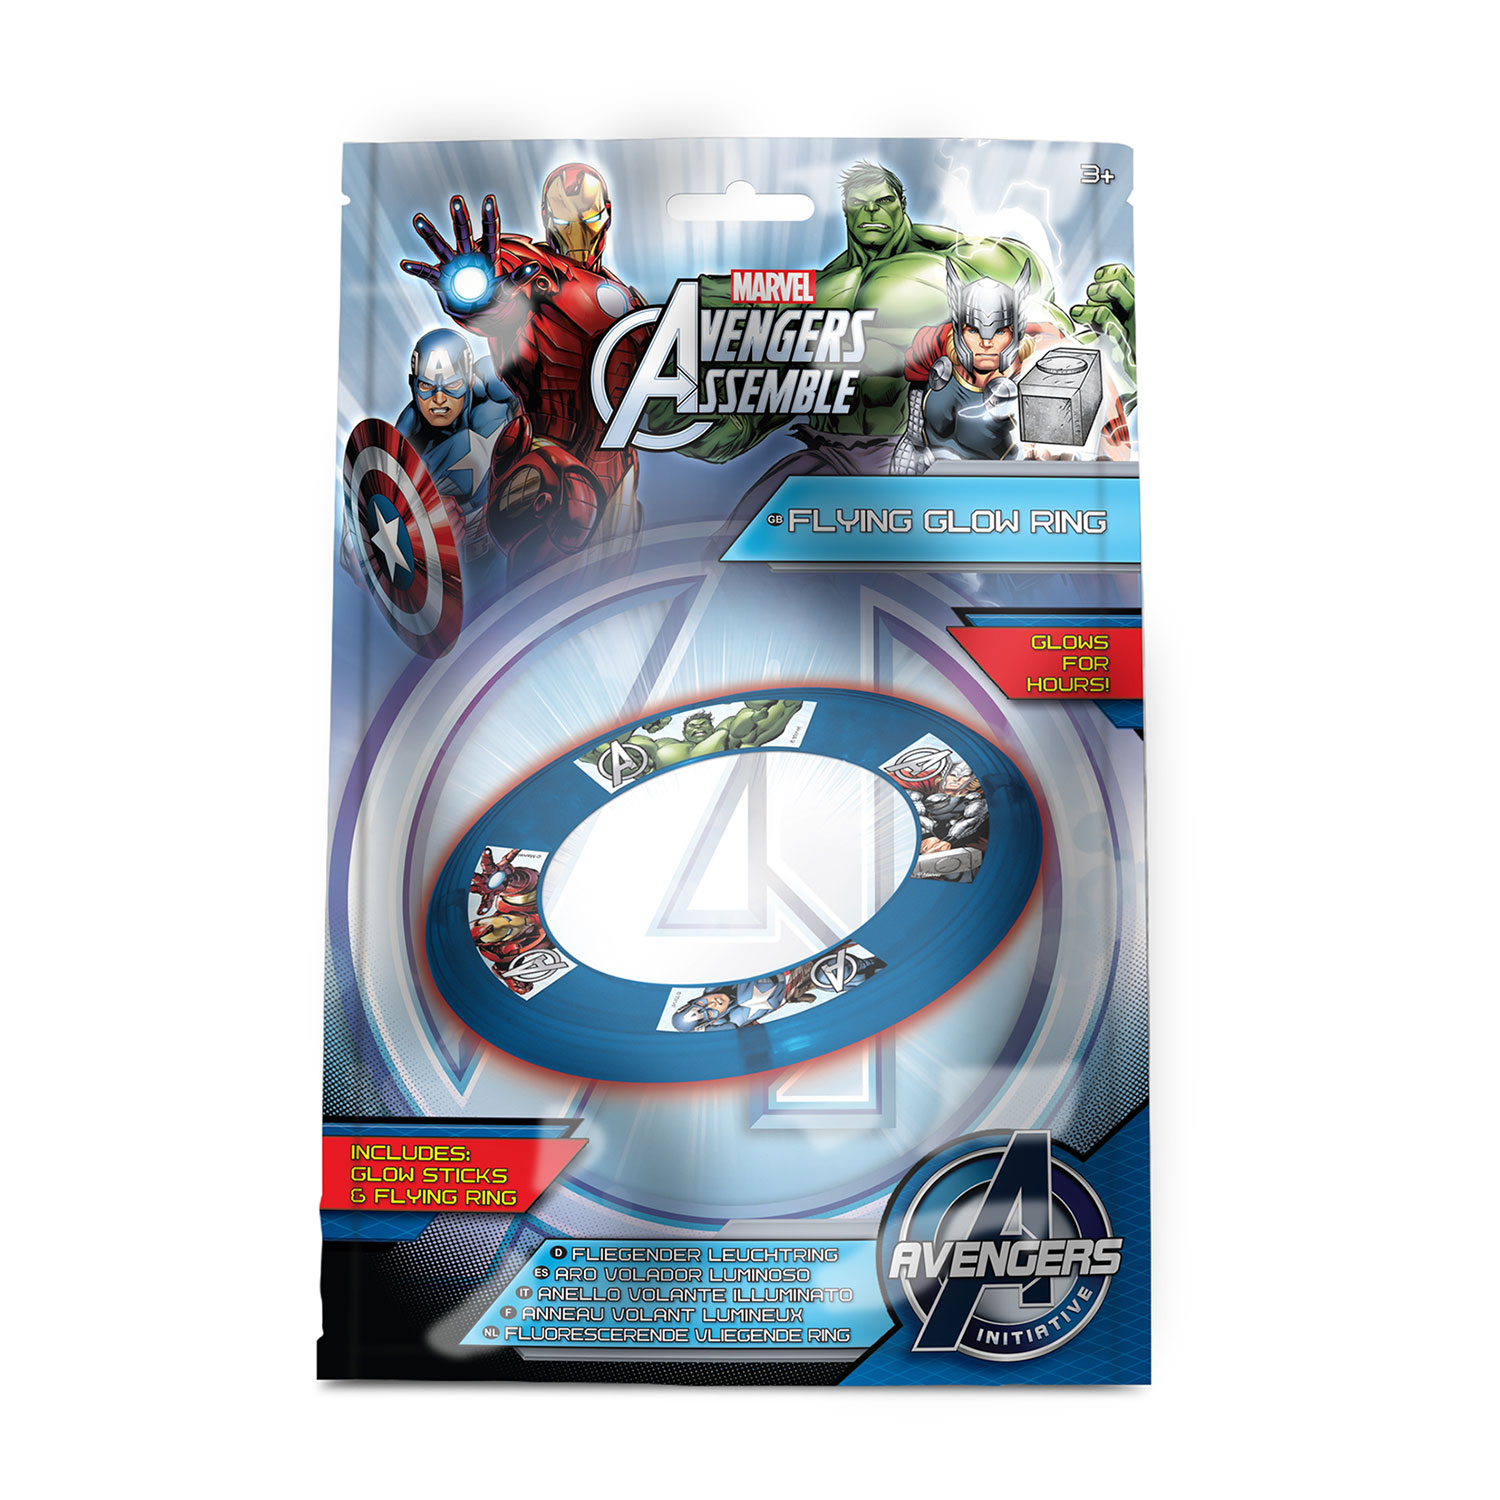 The Avengers Glow in the Dark Ring